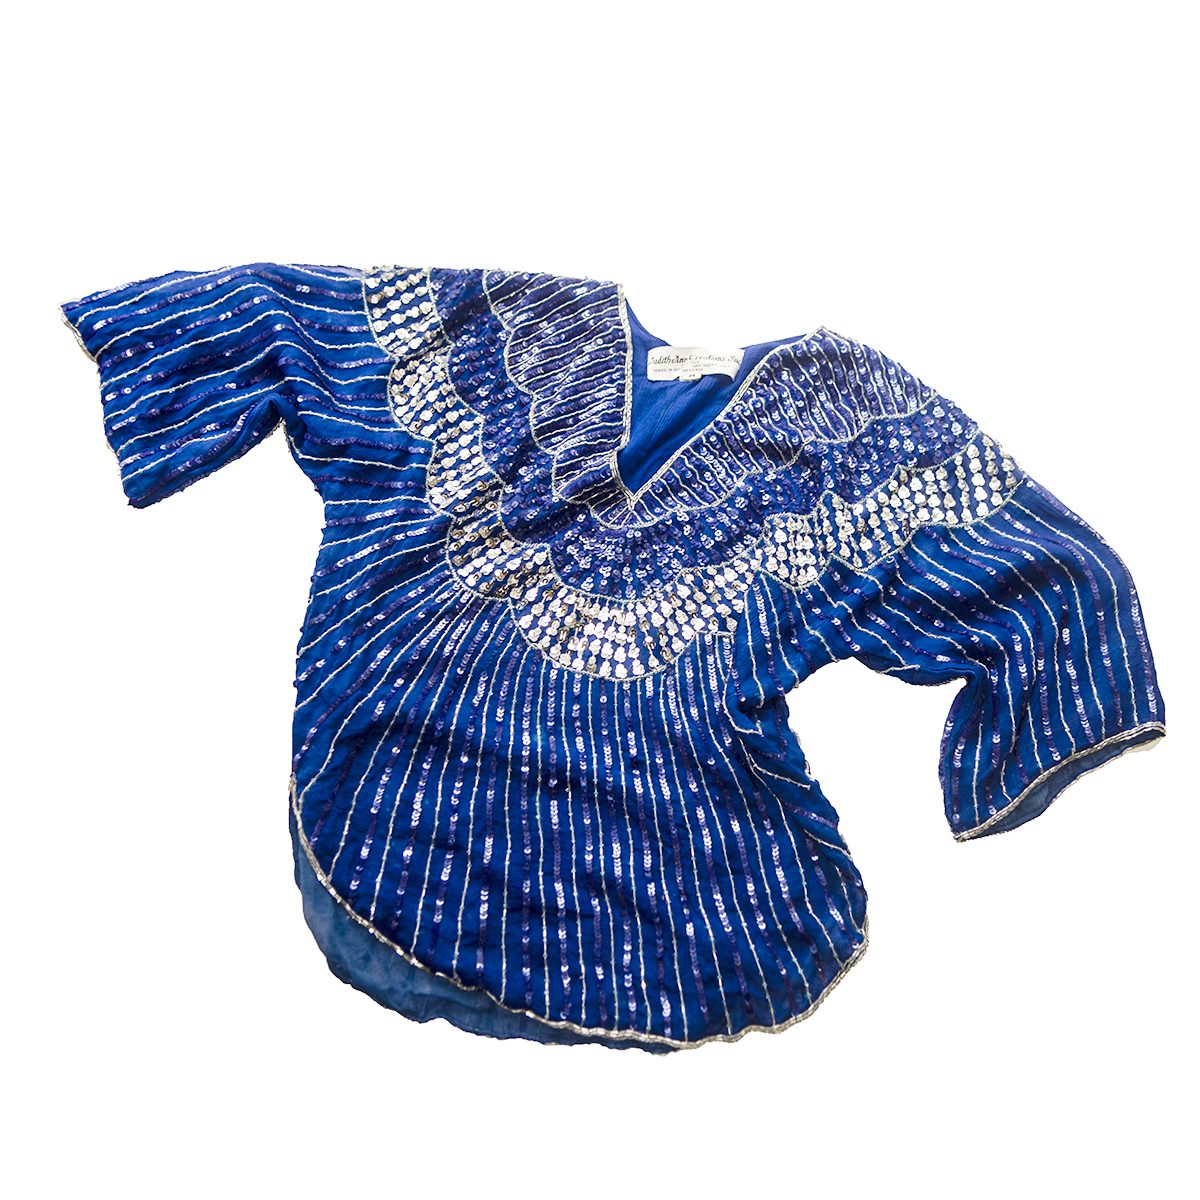 Blue sequin top by Judith Ann Creations